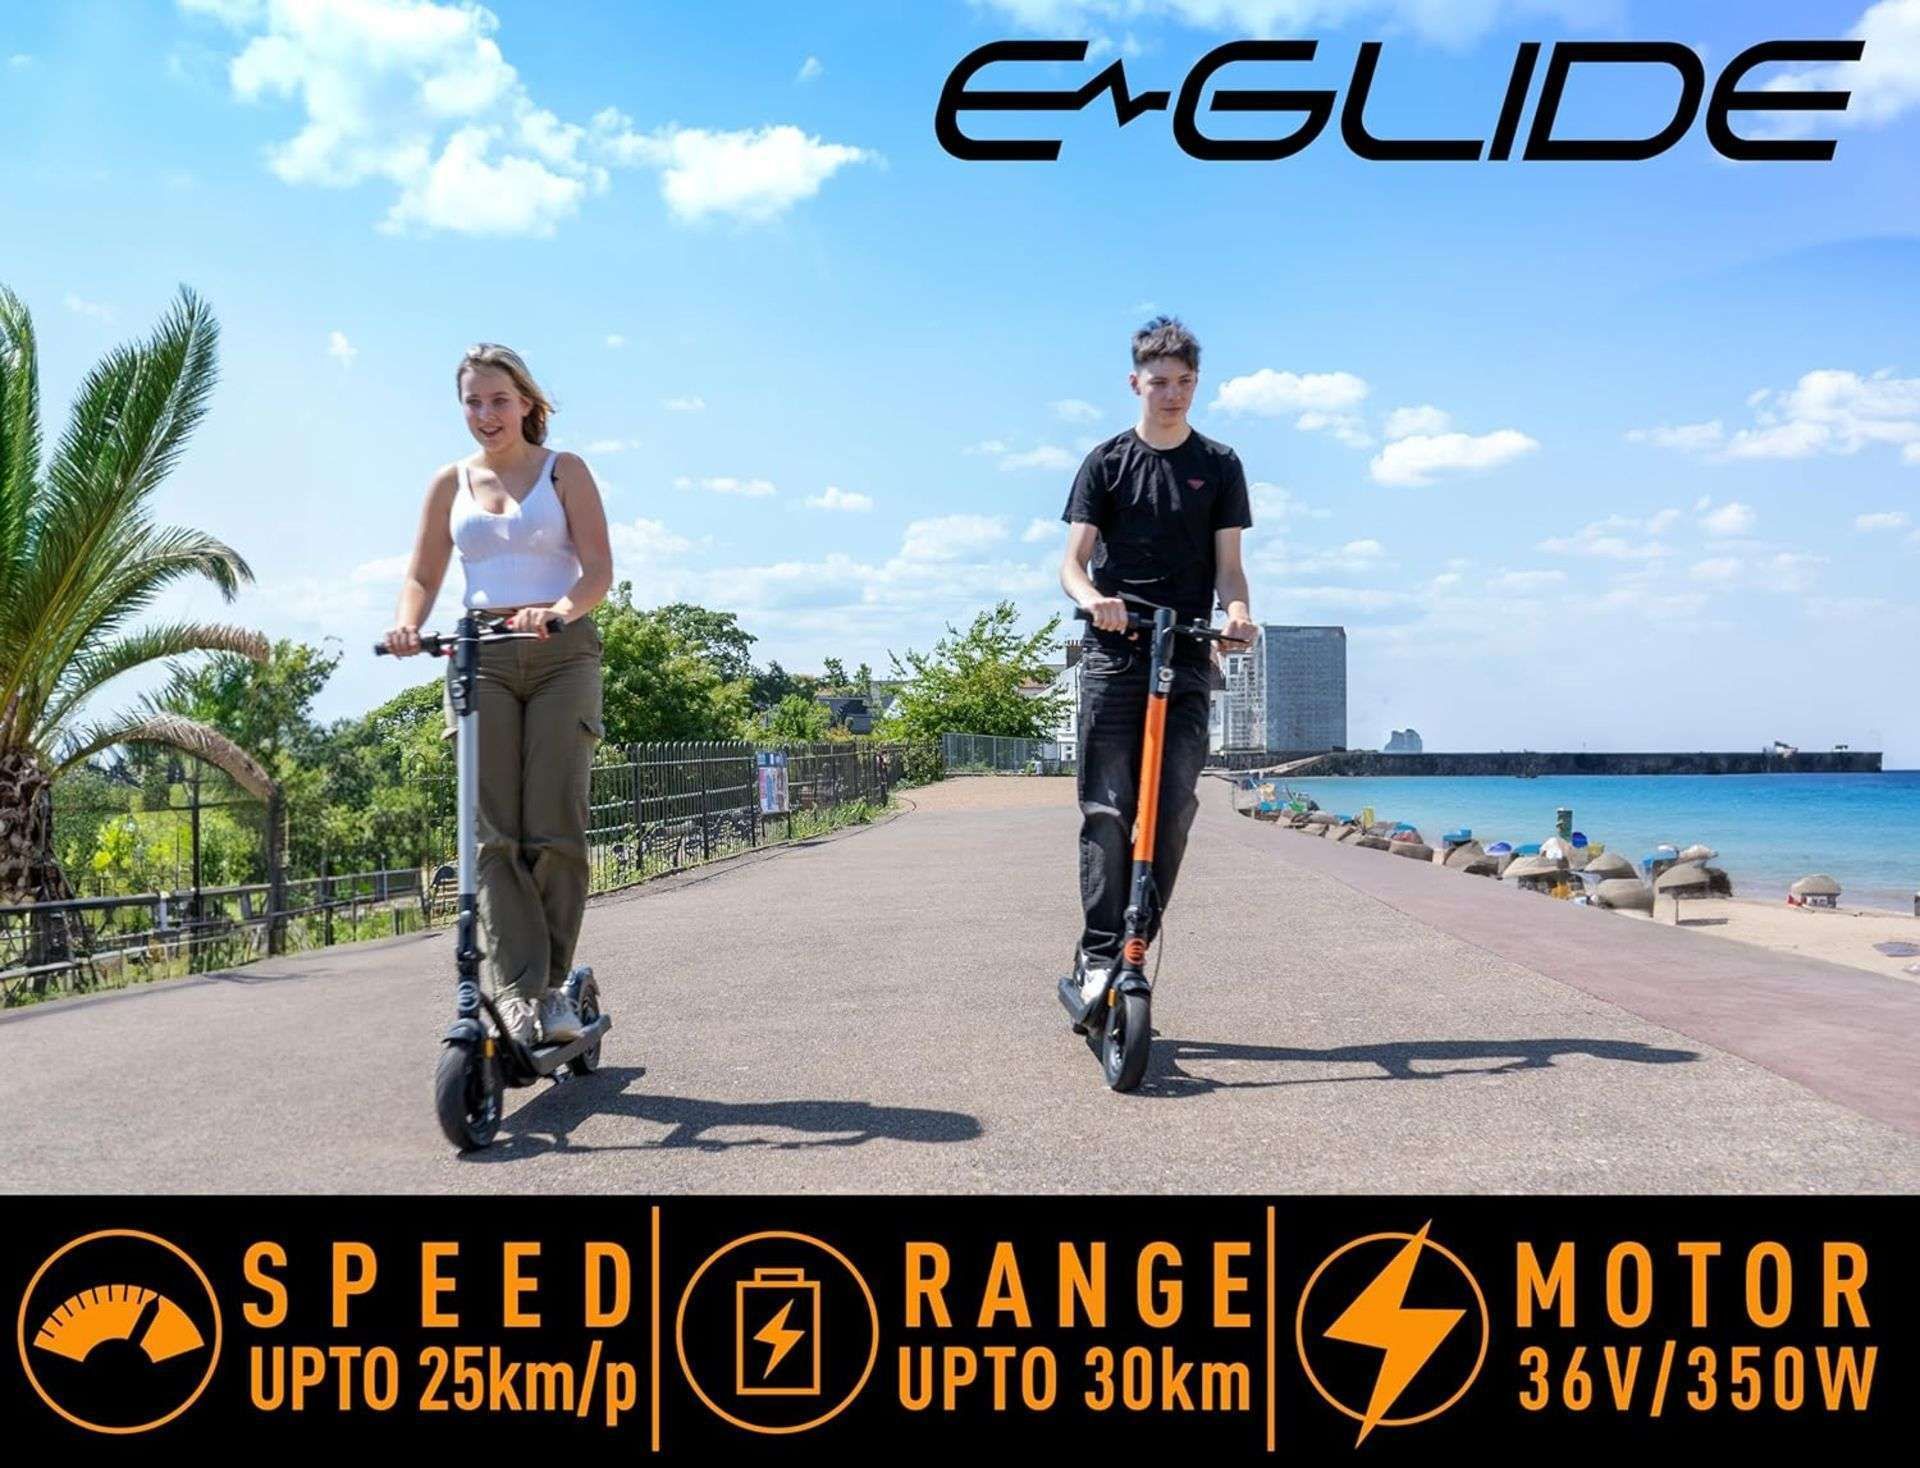 Trade Lot 4 x Brand New E-Glide V2 Electric Scooter Grey and Black RRP £599, Introducing a sleek and - Bild 3 aus 5